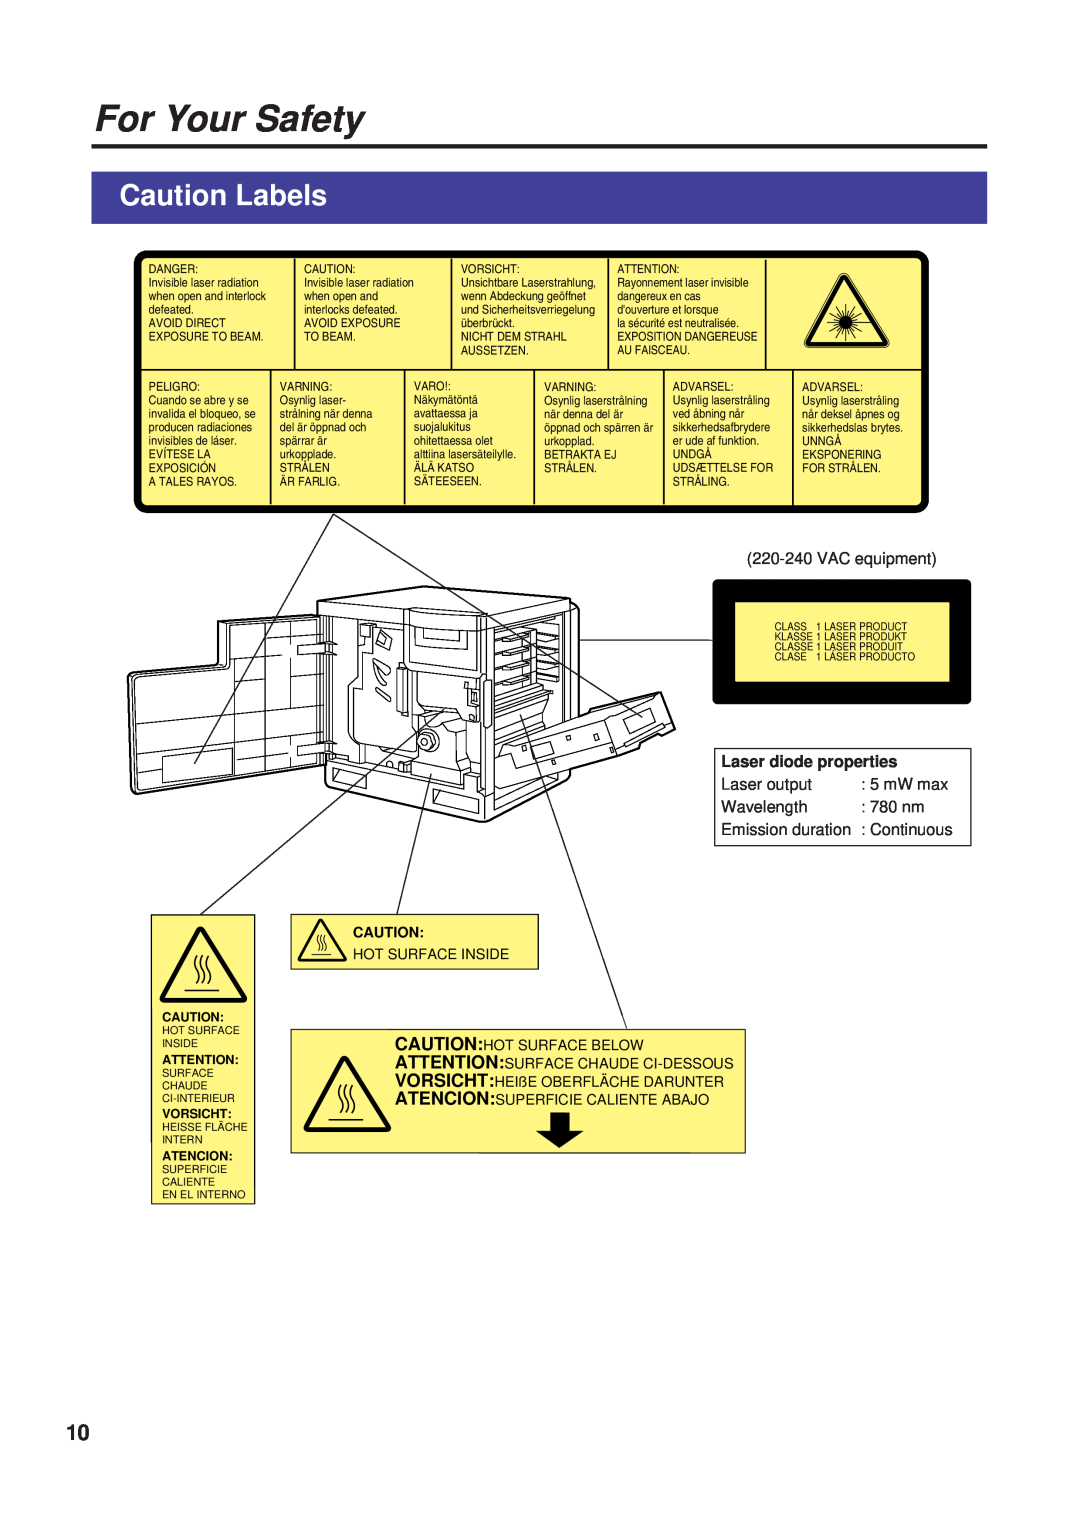 Panasonic KX-PS8000 Caution Labels, For Your Safety, VAC equipment, Laser diode properties, Laser output, mW max, 780 nm 